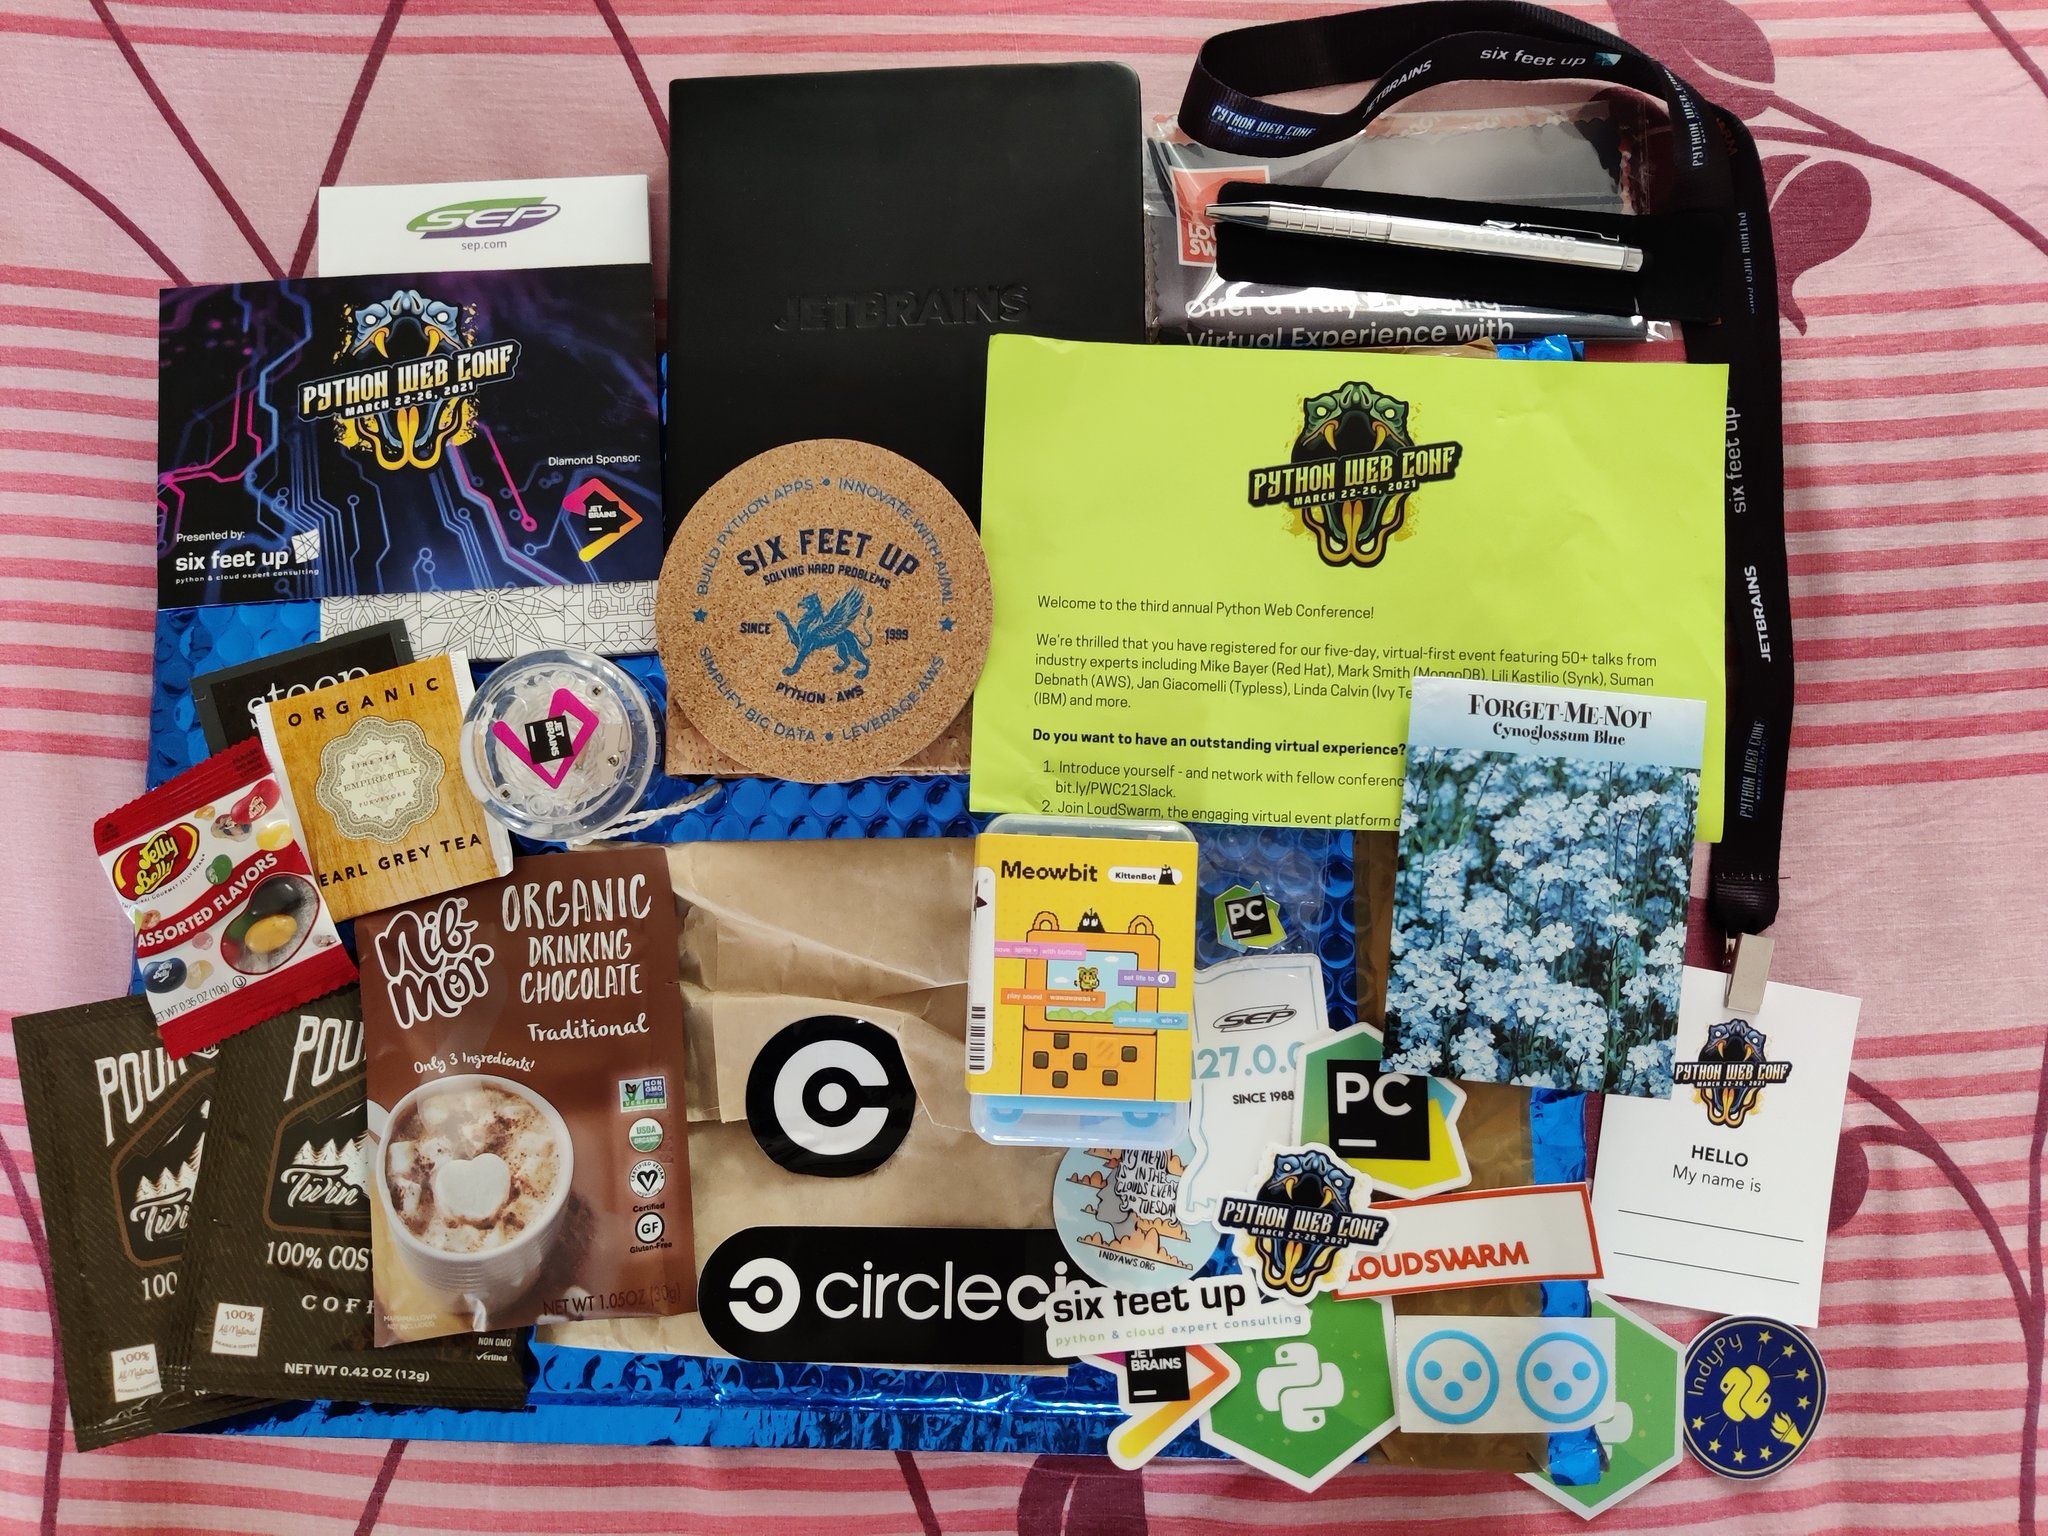 Image of numerous swag bag contents laid across a flat surface